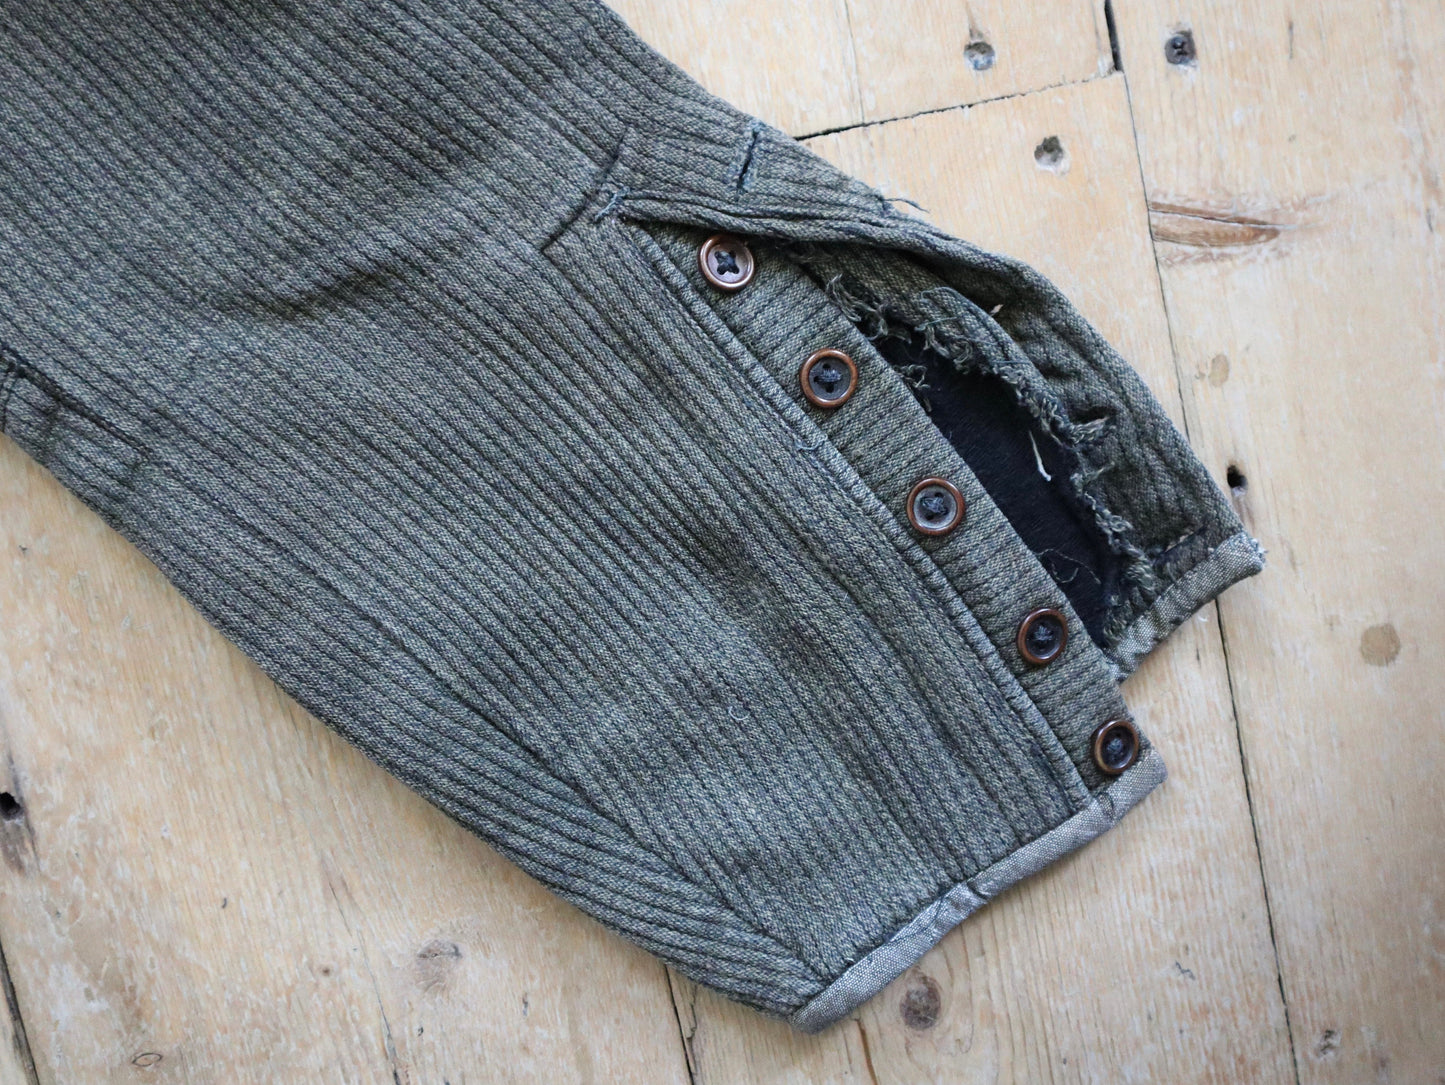 1930s French Brown Breeches Cotton Ribbed Workwear Hunting Trousers Pants